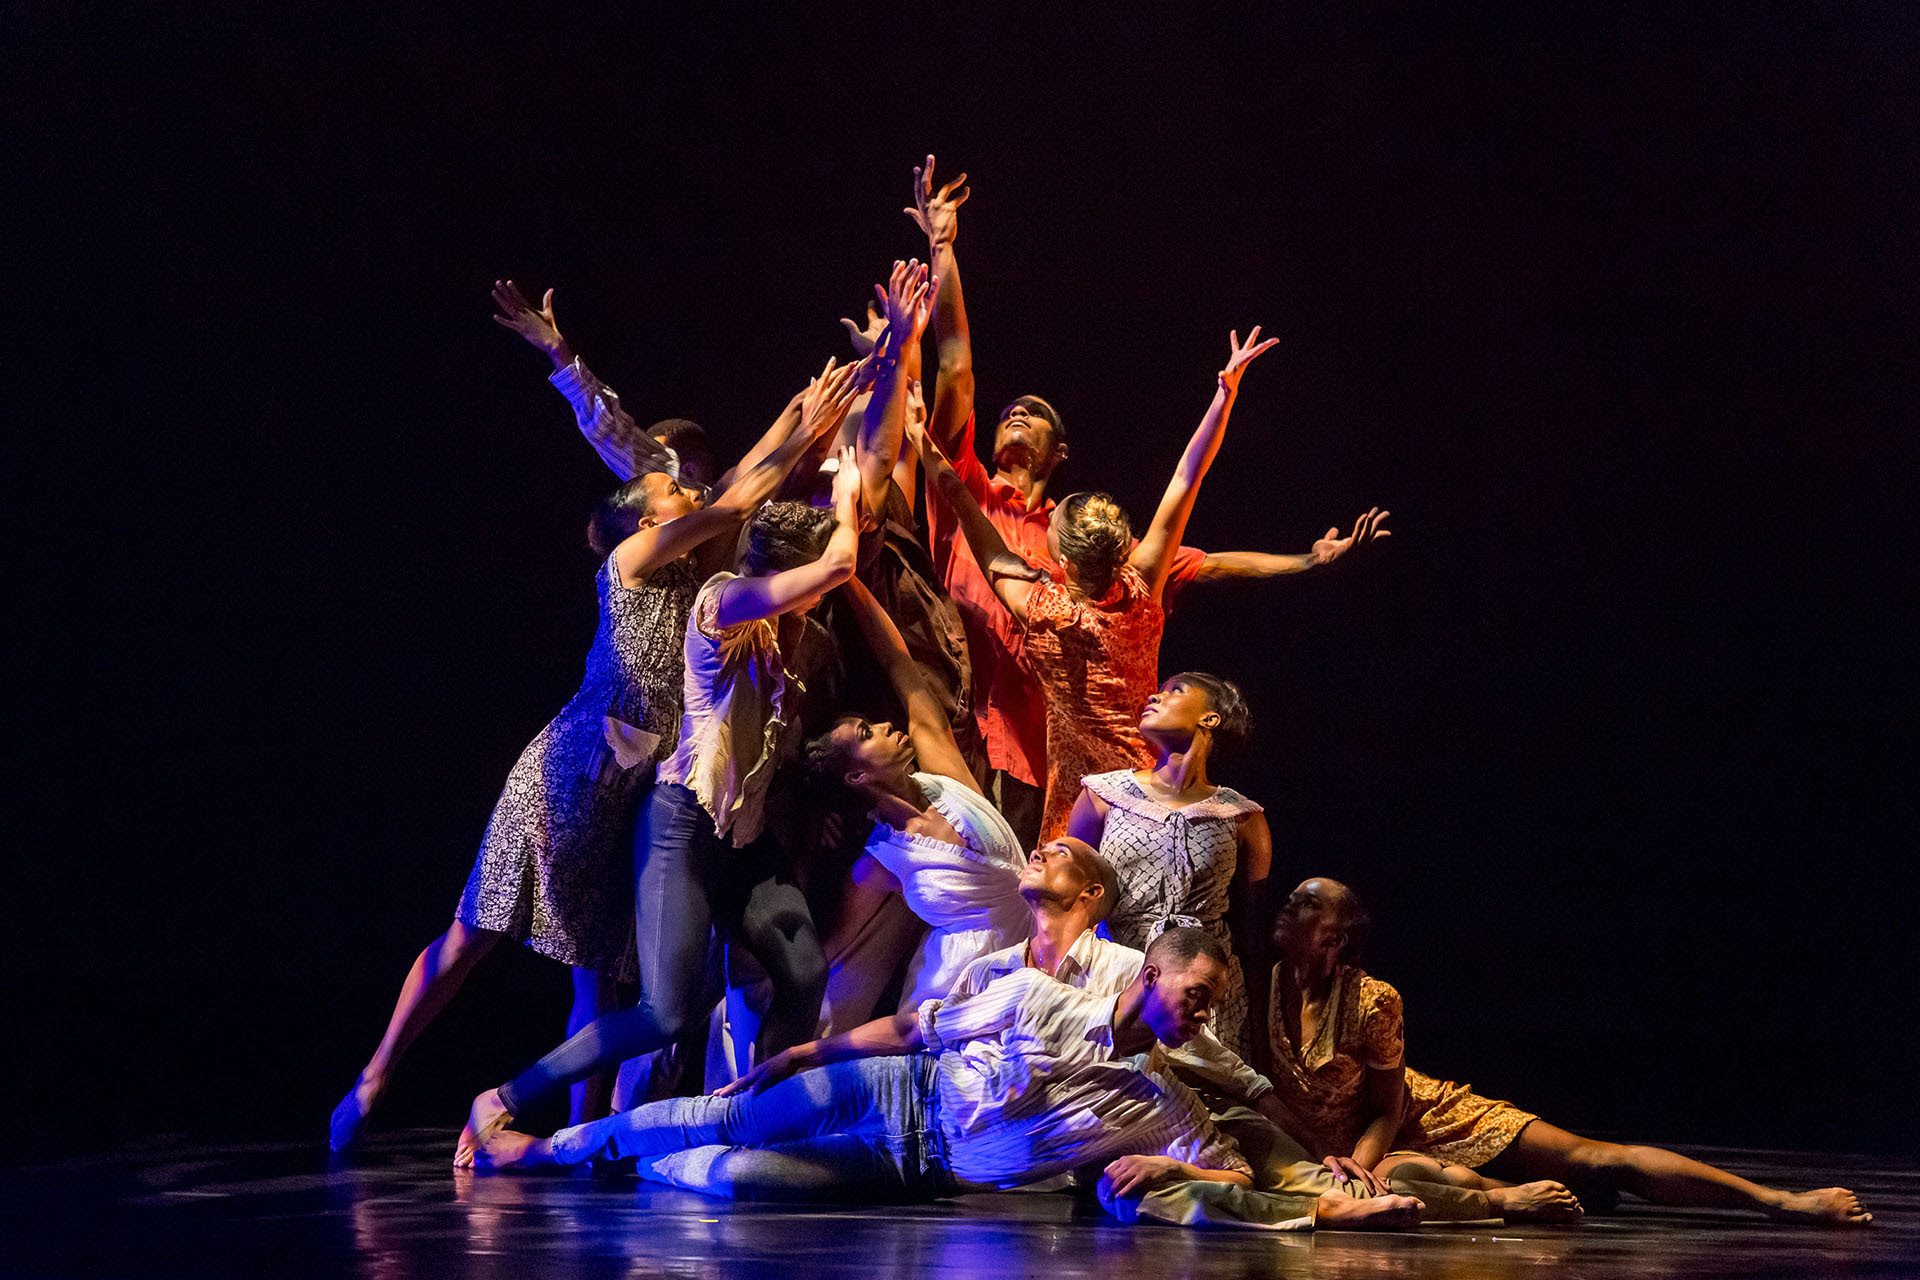 Dallas Black Dance Theatre Celebrates African American Dance Masters in a Virtual Performance Featuring the Work of Matthew Rushing, Associate Artistic Director of the Alvin Ailey American Dance Theater